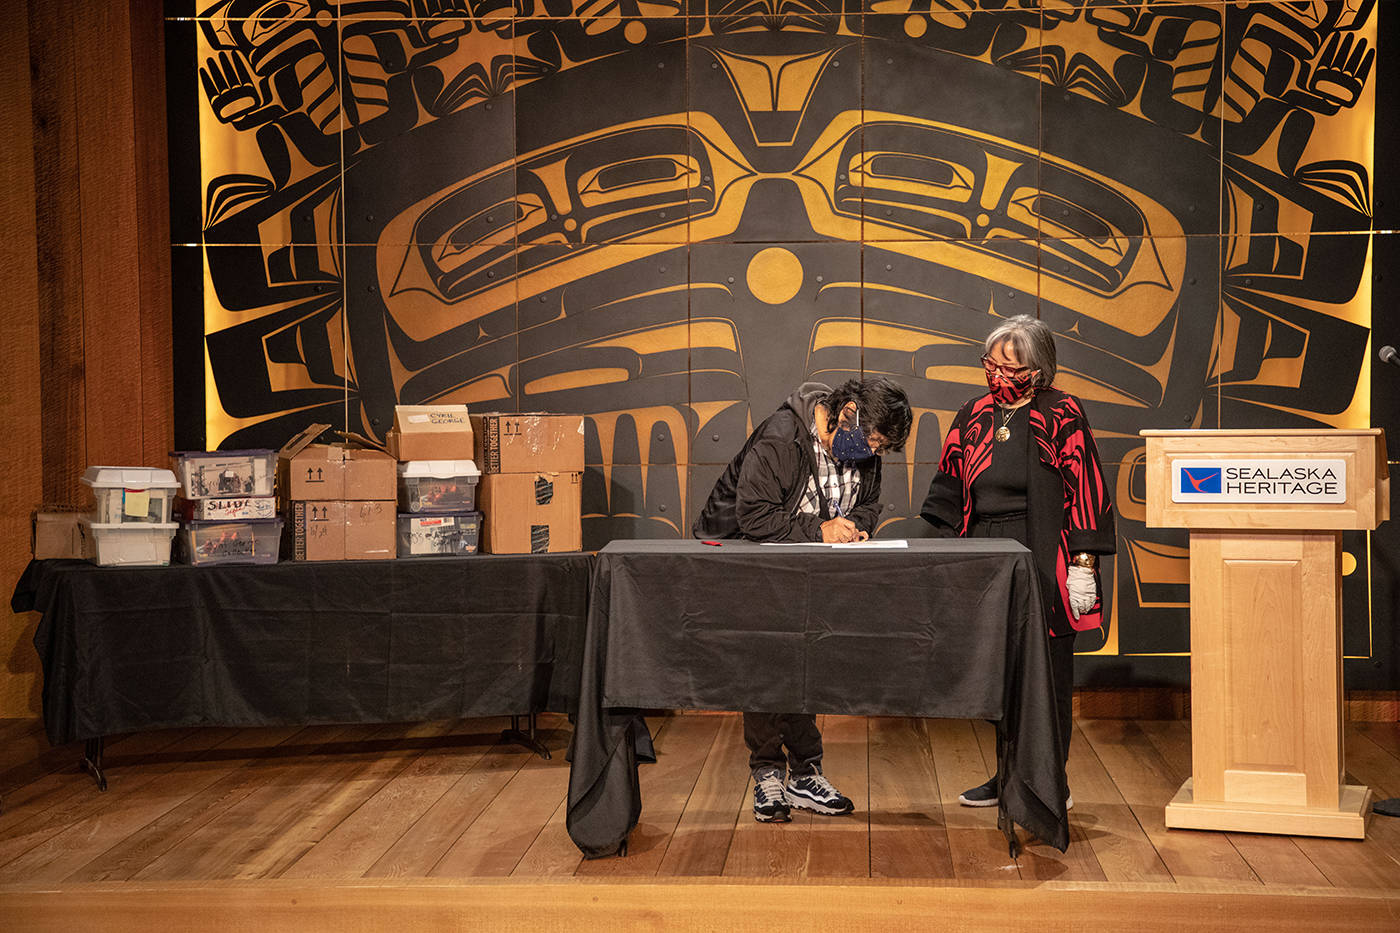 SHI President Rosita Worl and the late Cyril George’s daughter, Roberta Jack, sign a deed of gift at a transfer ceremony last week with the photo collection visible in the background. (Courtesy Photo / Lyndsey Brollini, Sealaska Heritage)